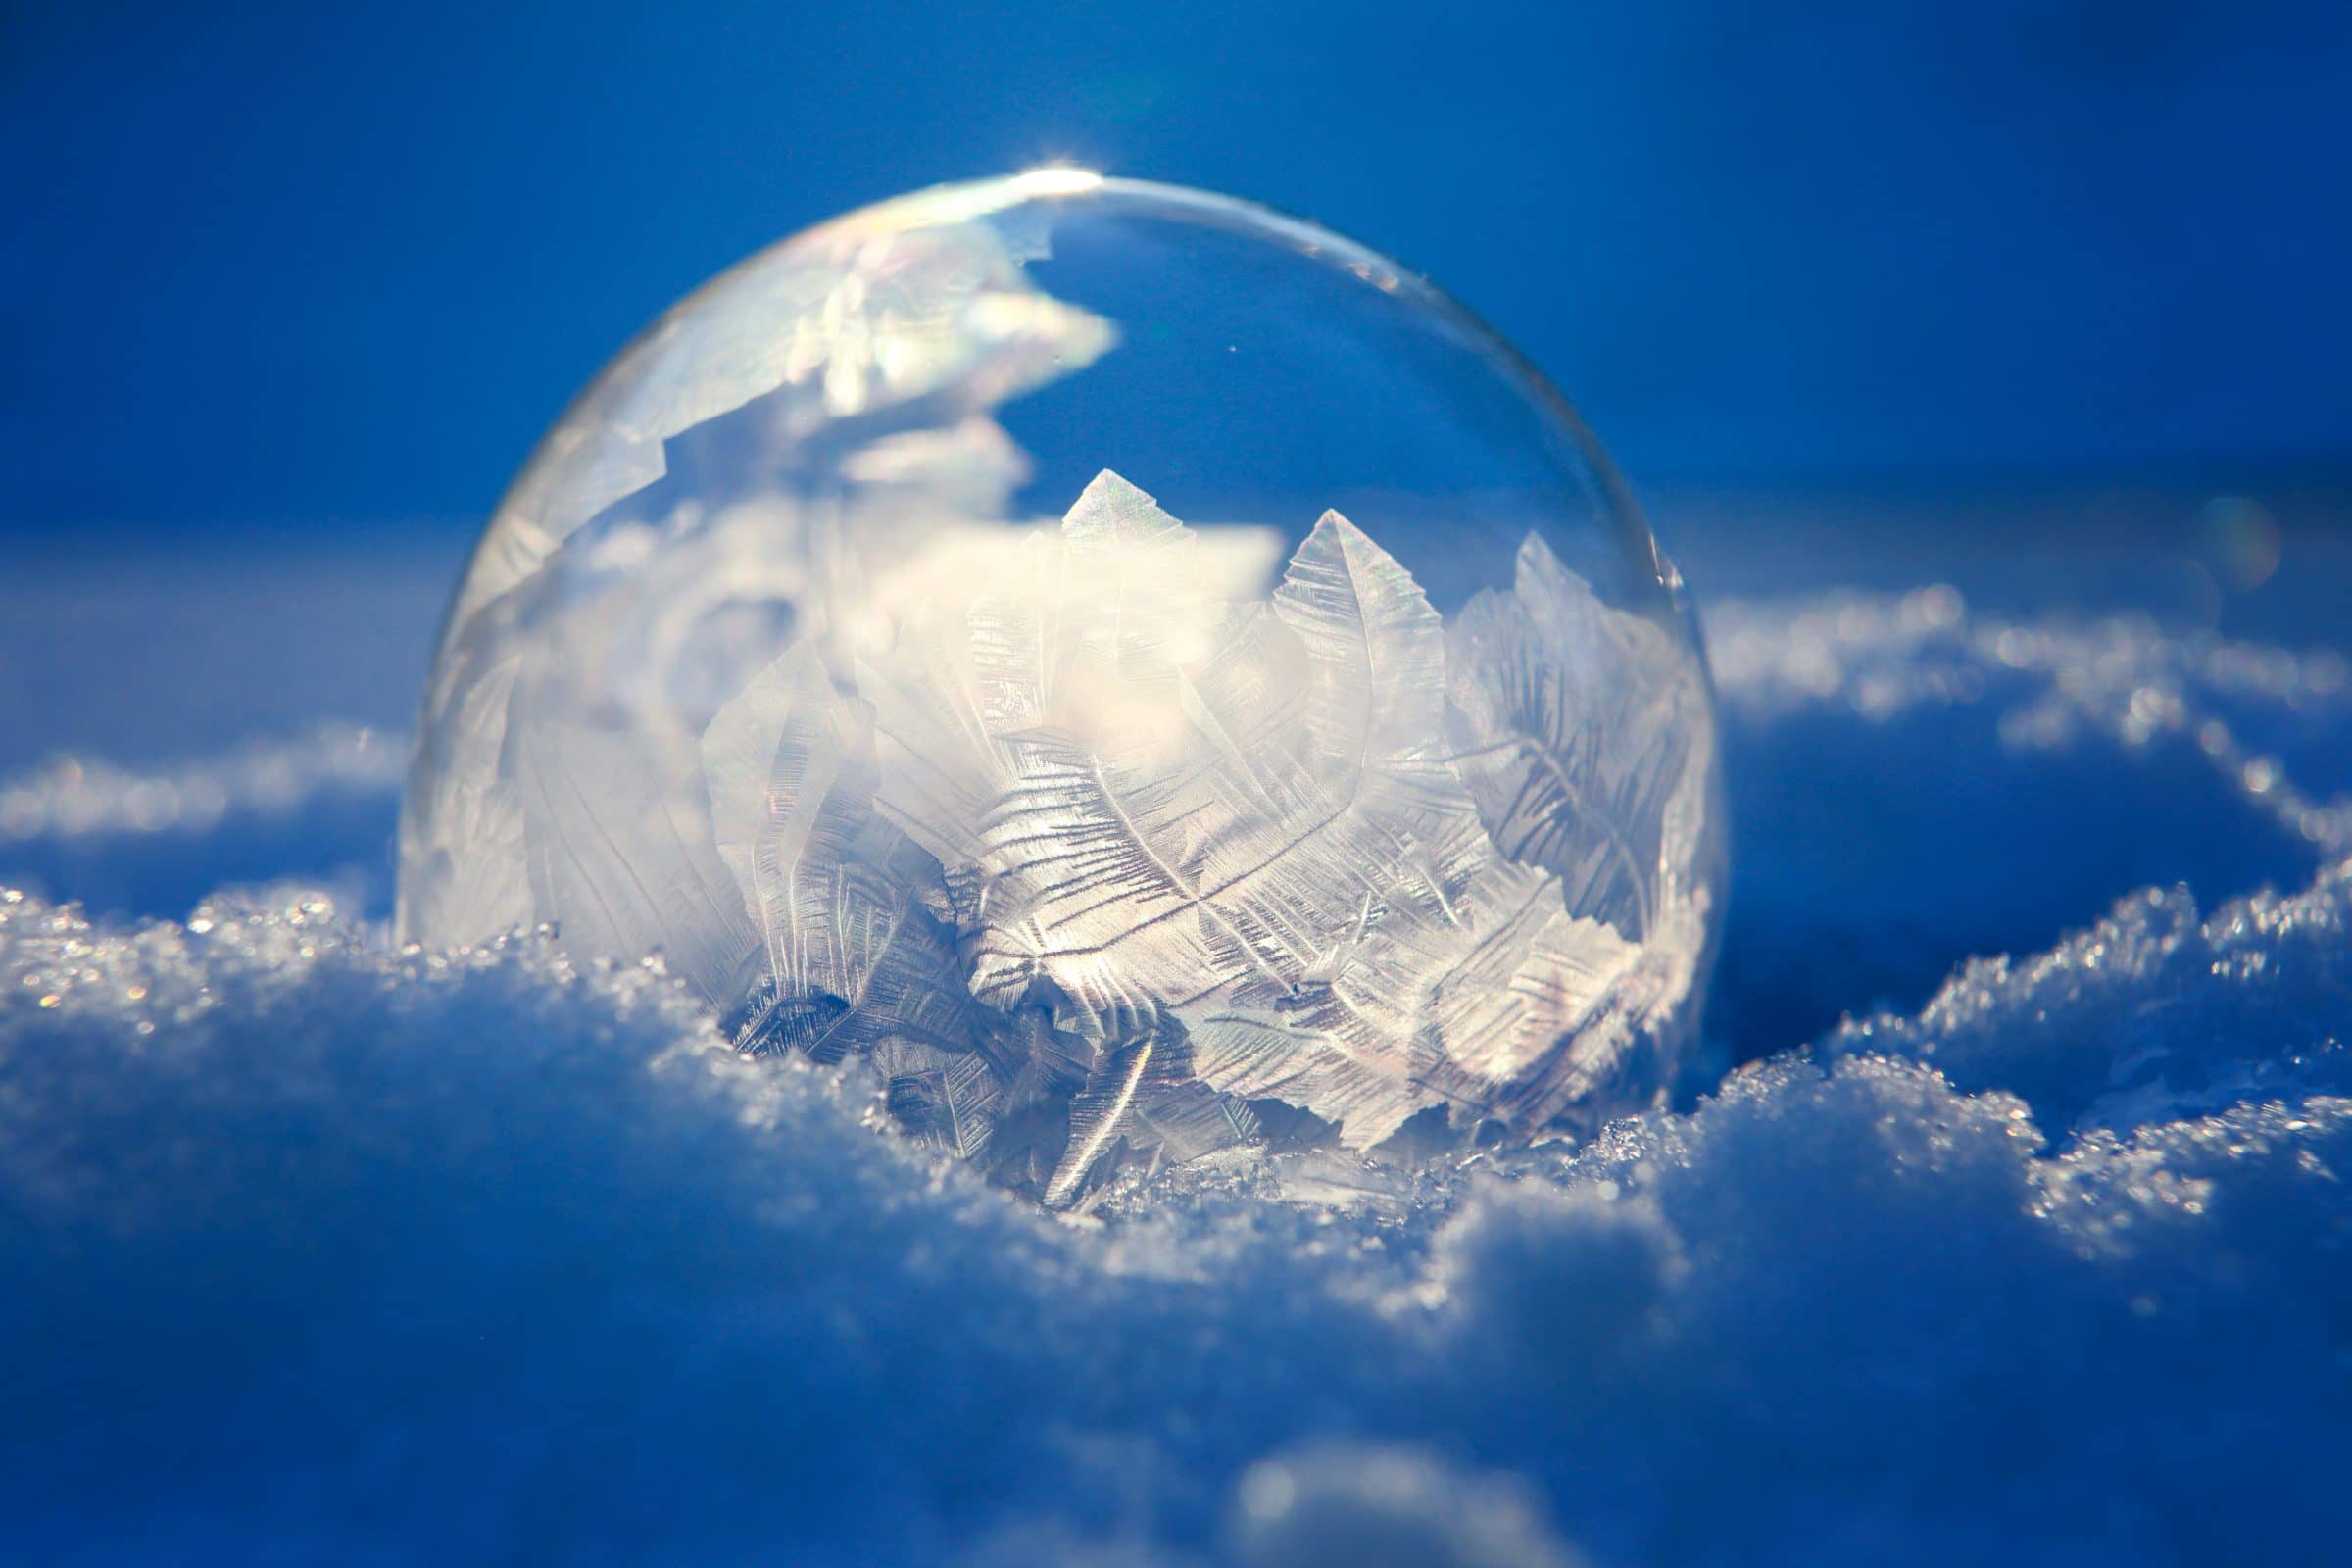 A frozen bubble sits in a pile of snow.